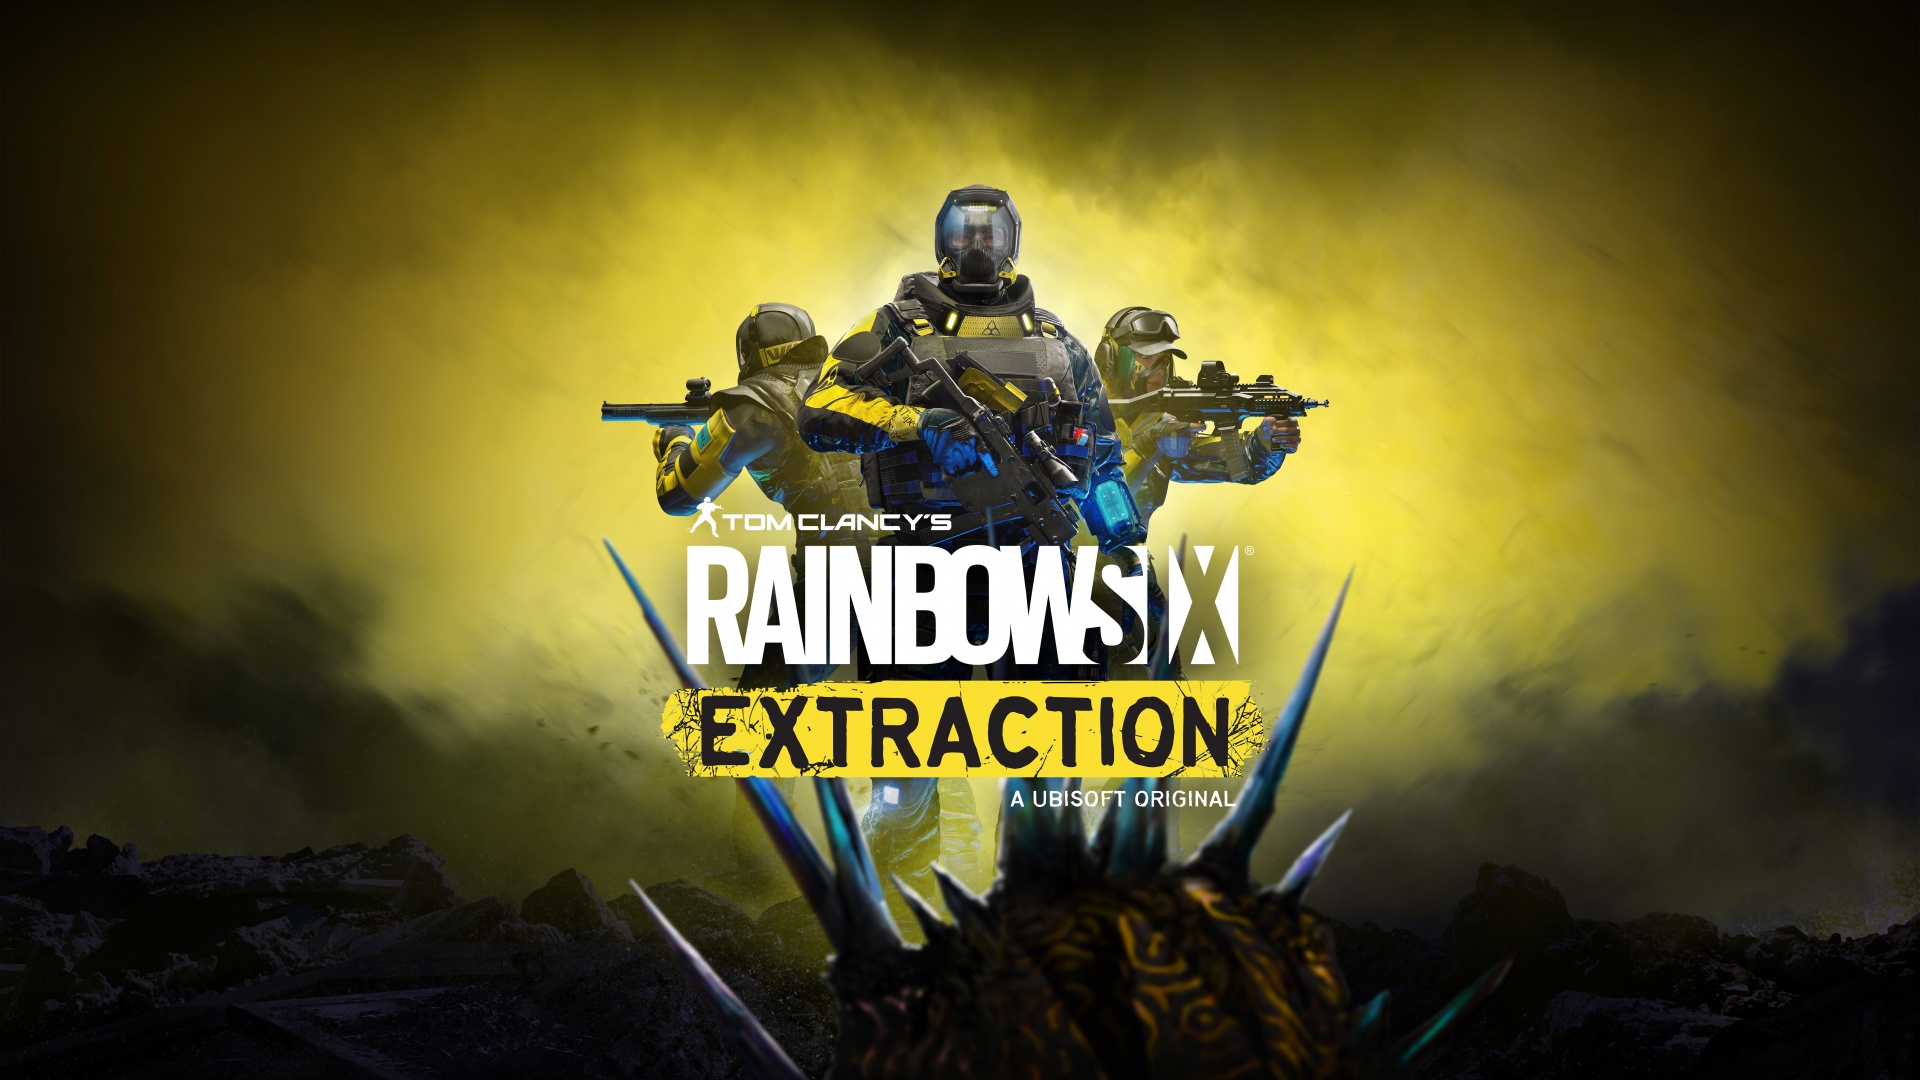 Tom Clancy's Rainbow Six Extraction Wallpaper 4K, E3 2021, 2021 Games